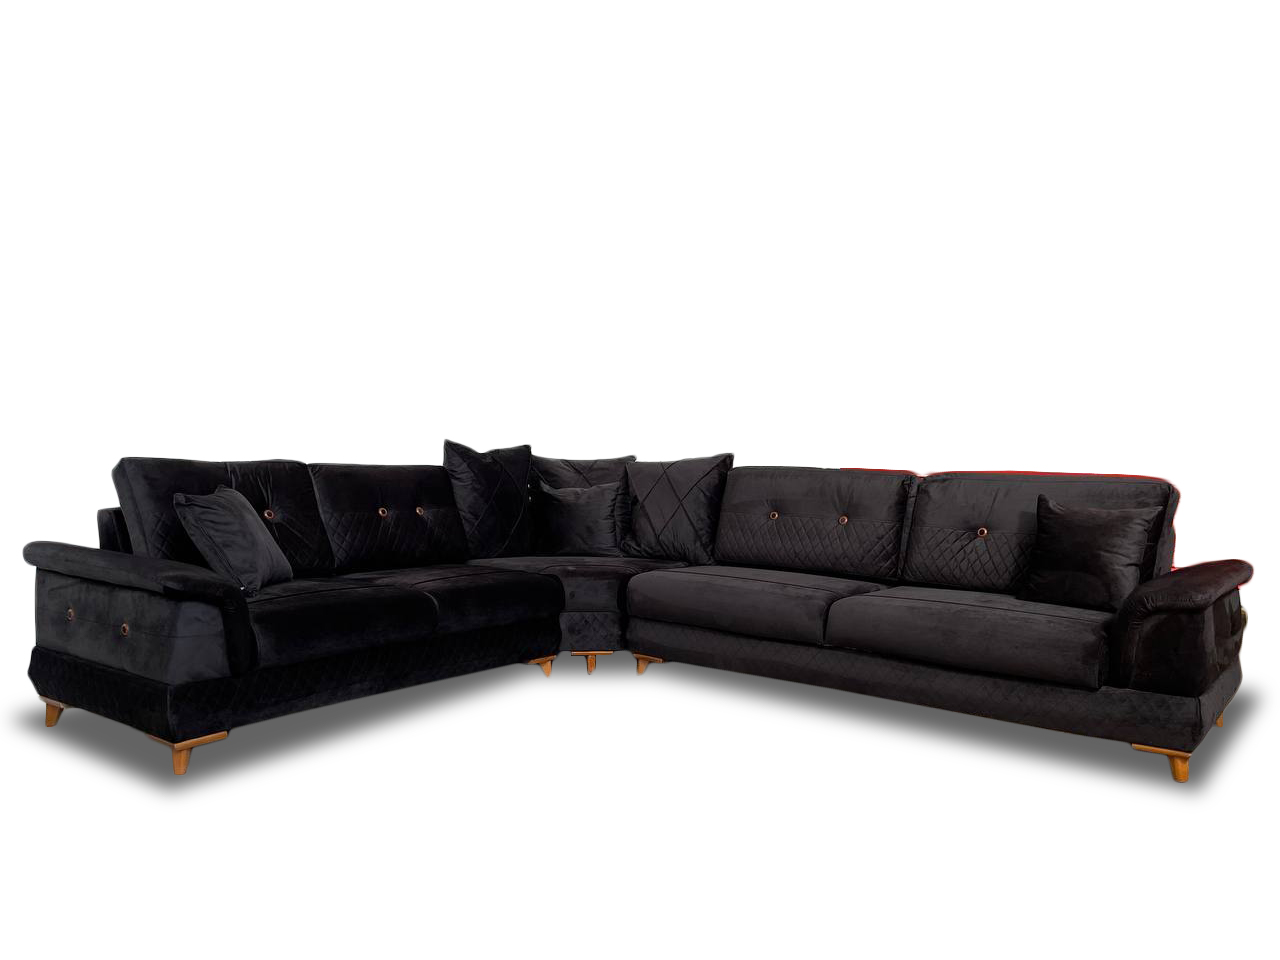 Black BEST STURDY EXTENDABLE CORNER SOFA BED, WITH BEST QUALITY AND LOWER PRICE 